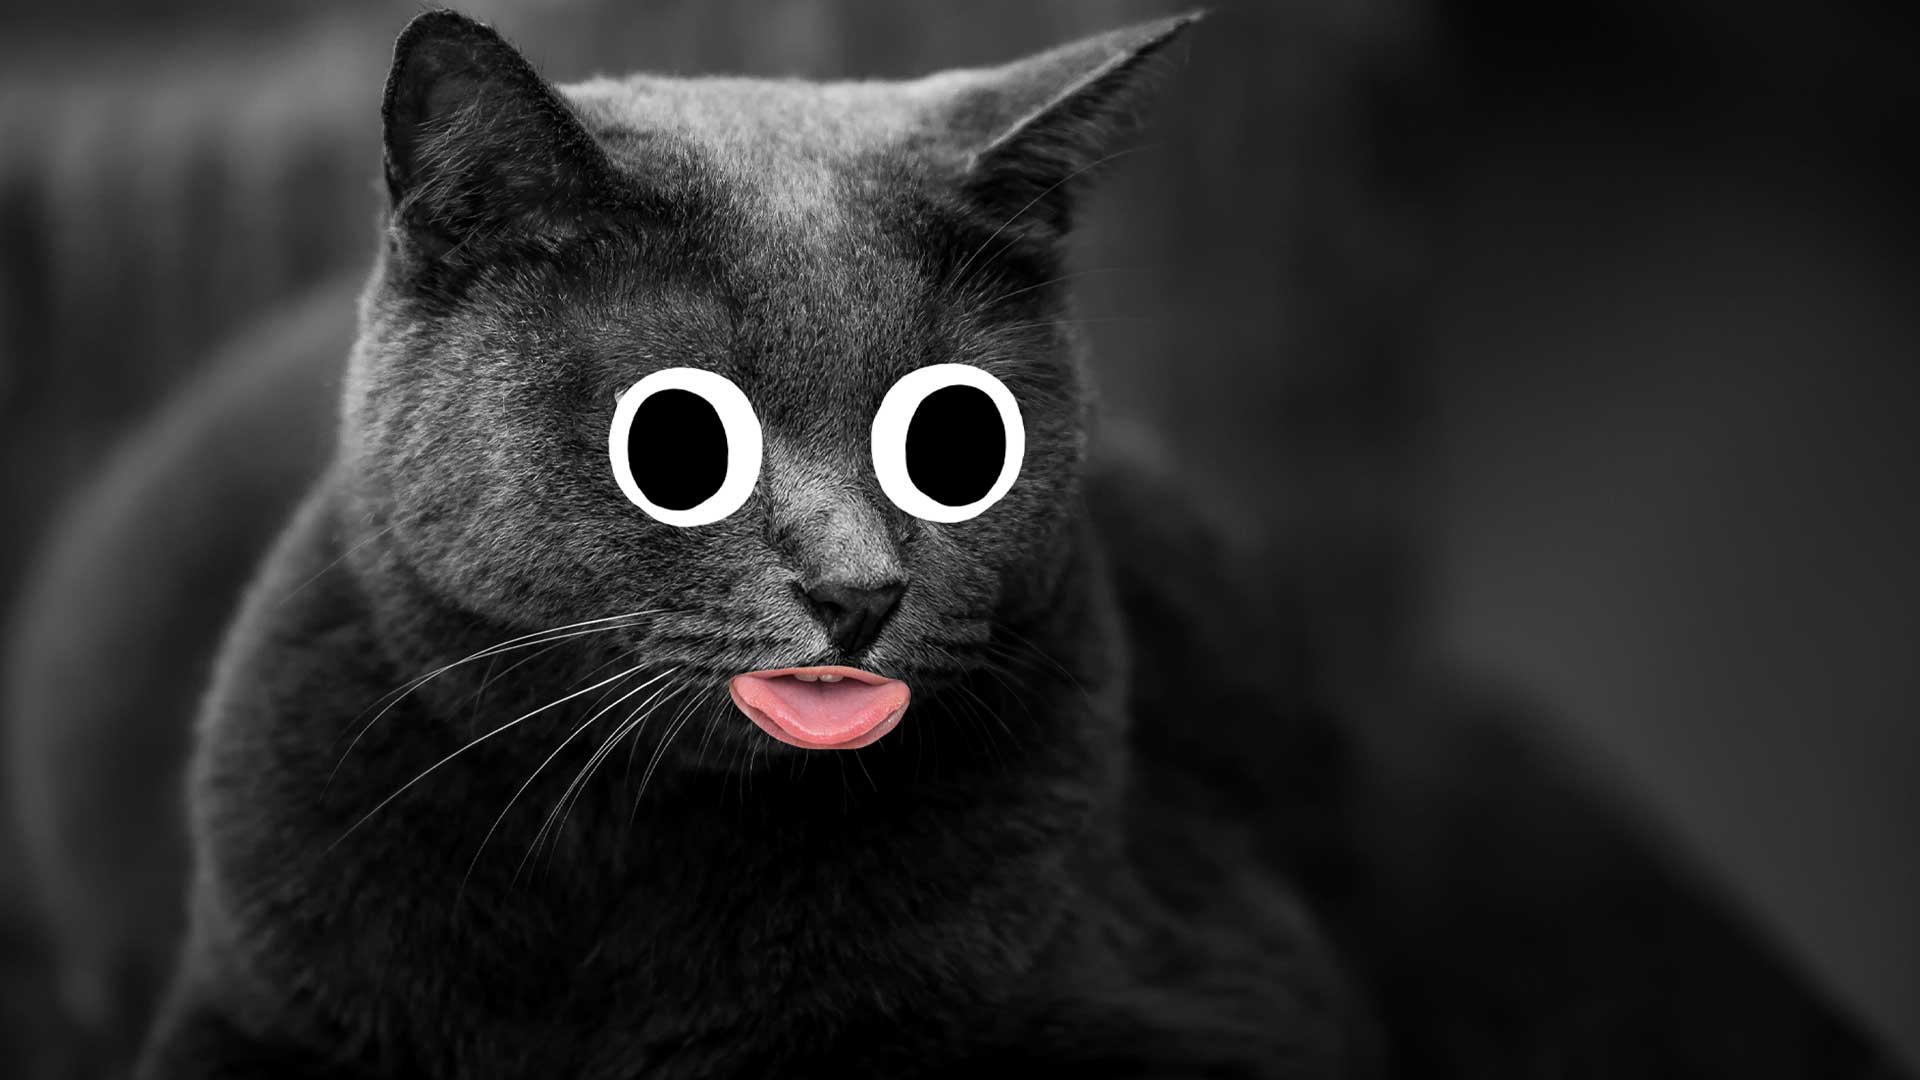 A cat sticking its tongue out